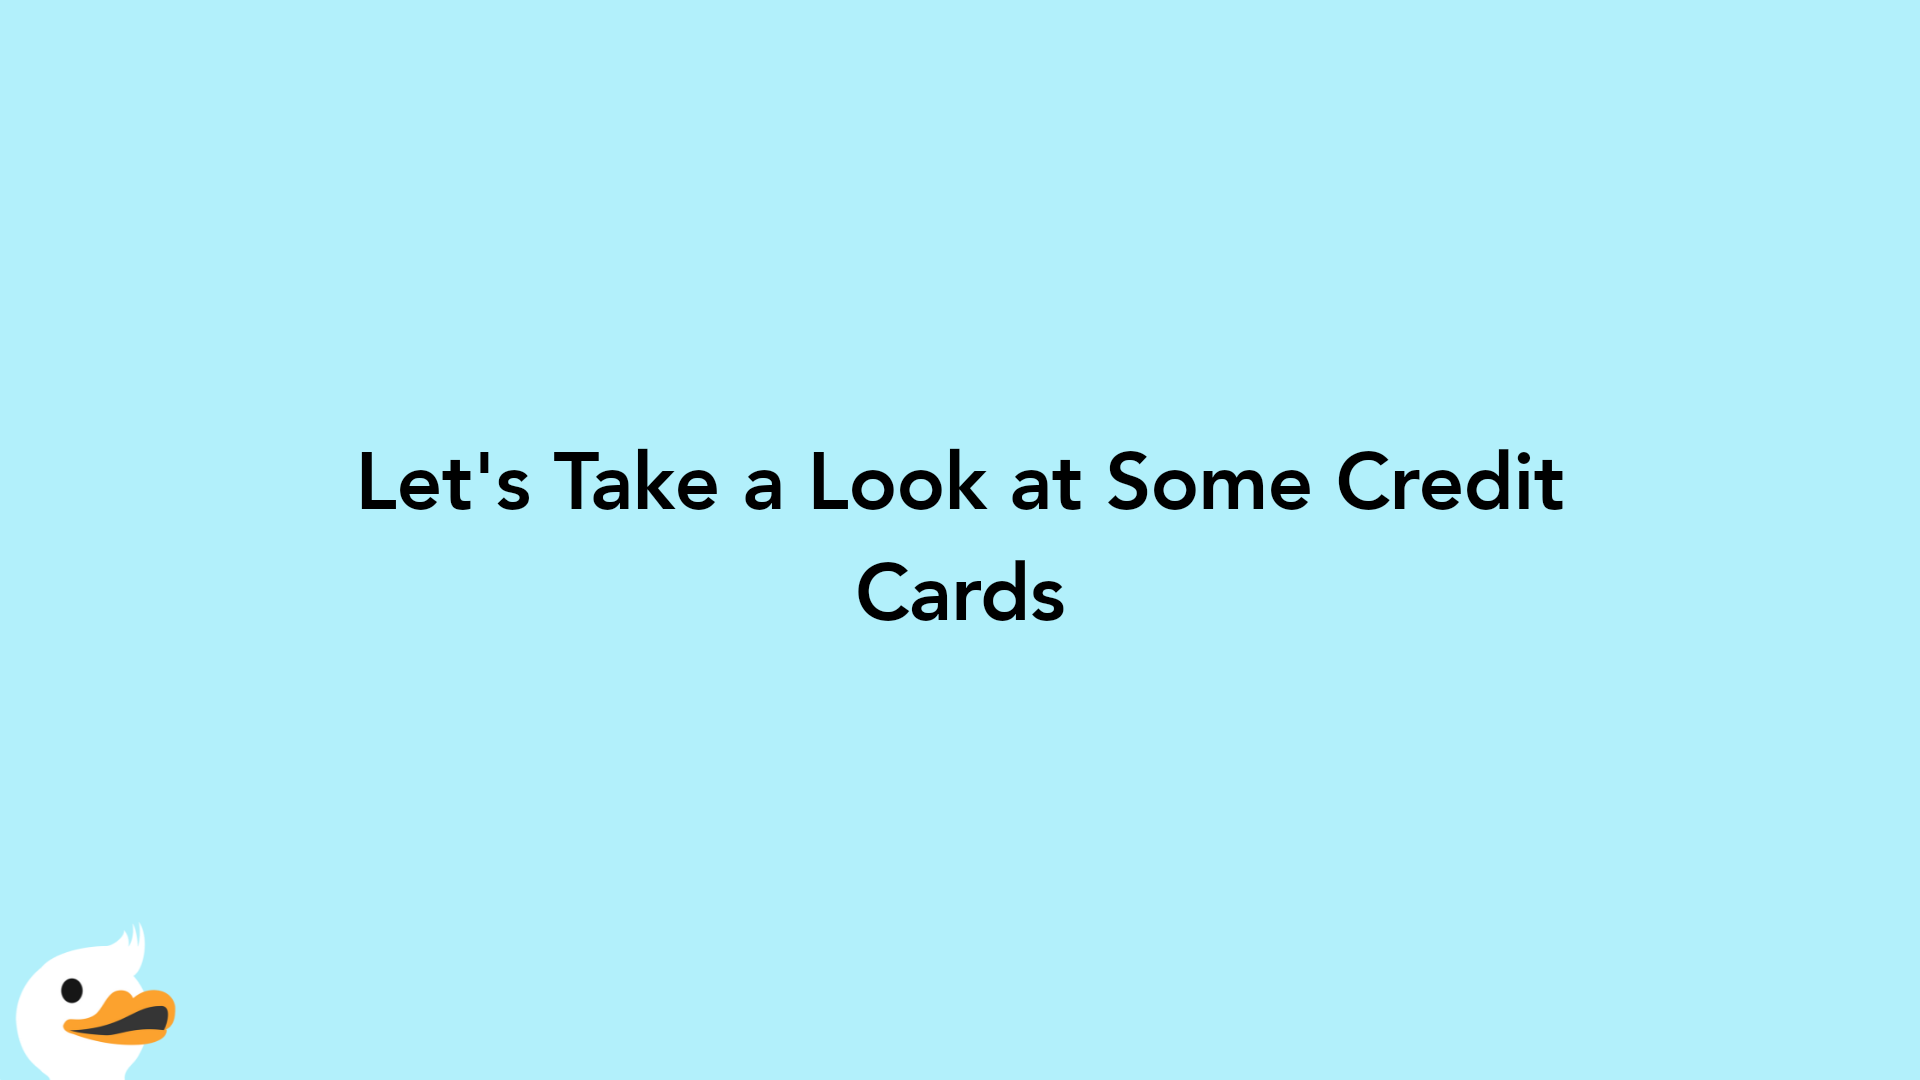 Let's Take a Look at Some Credit Cards